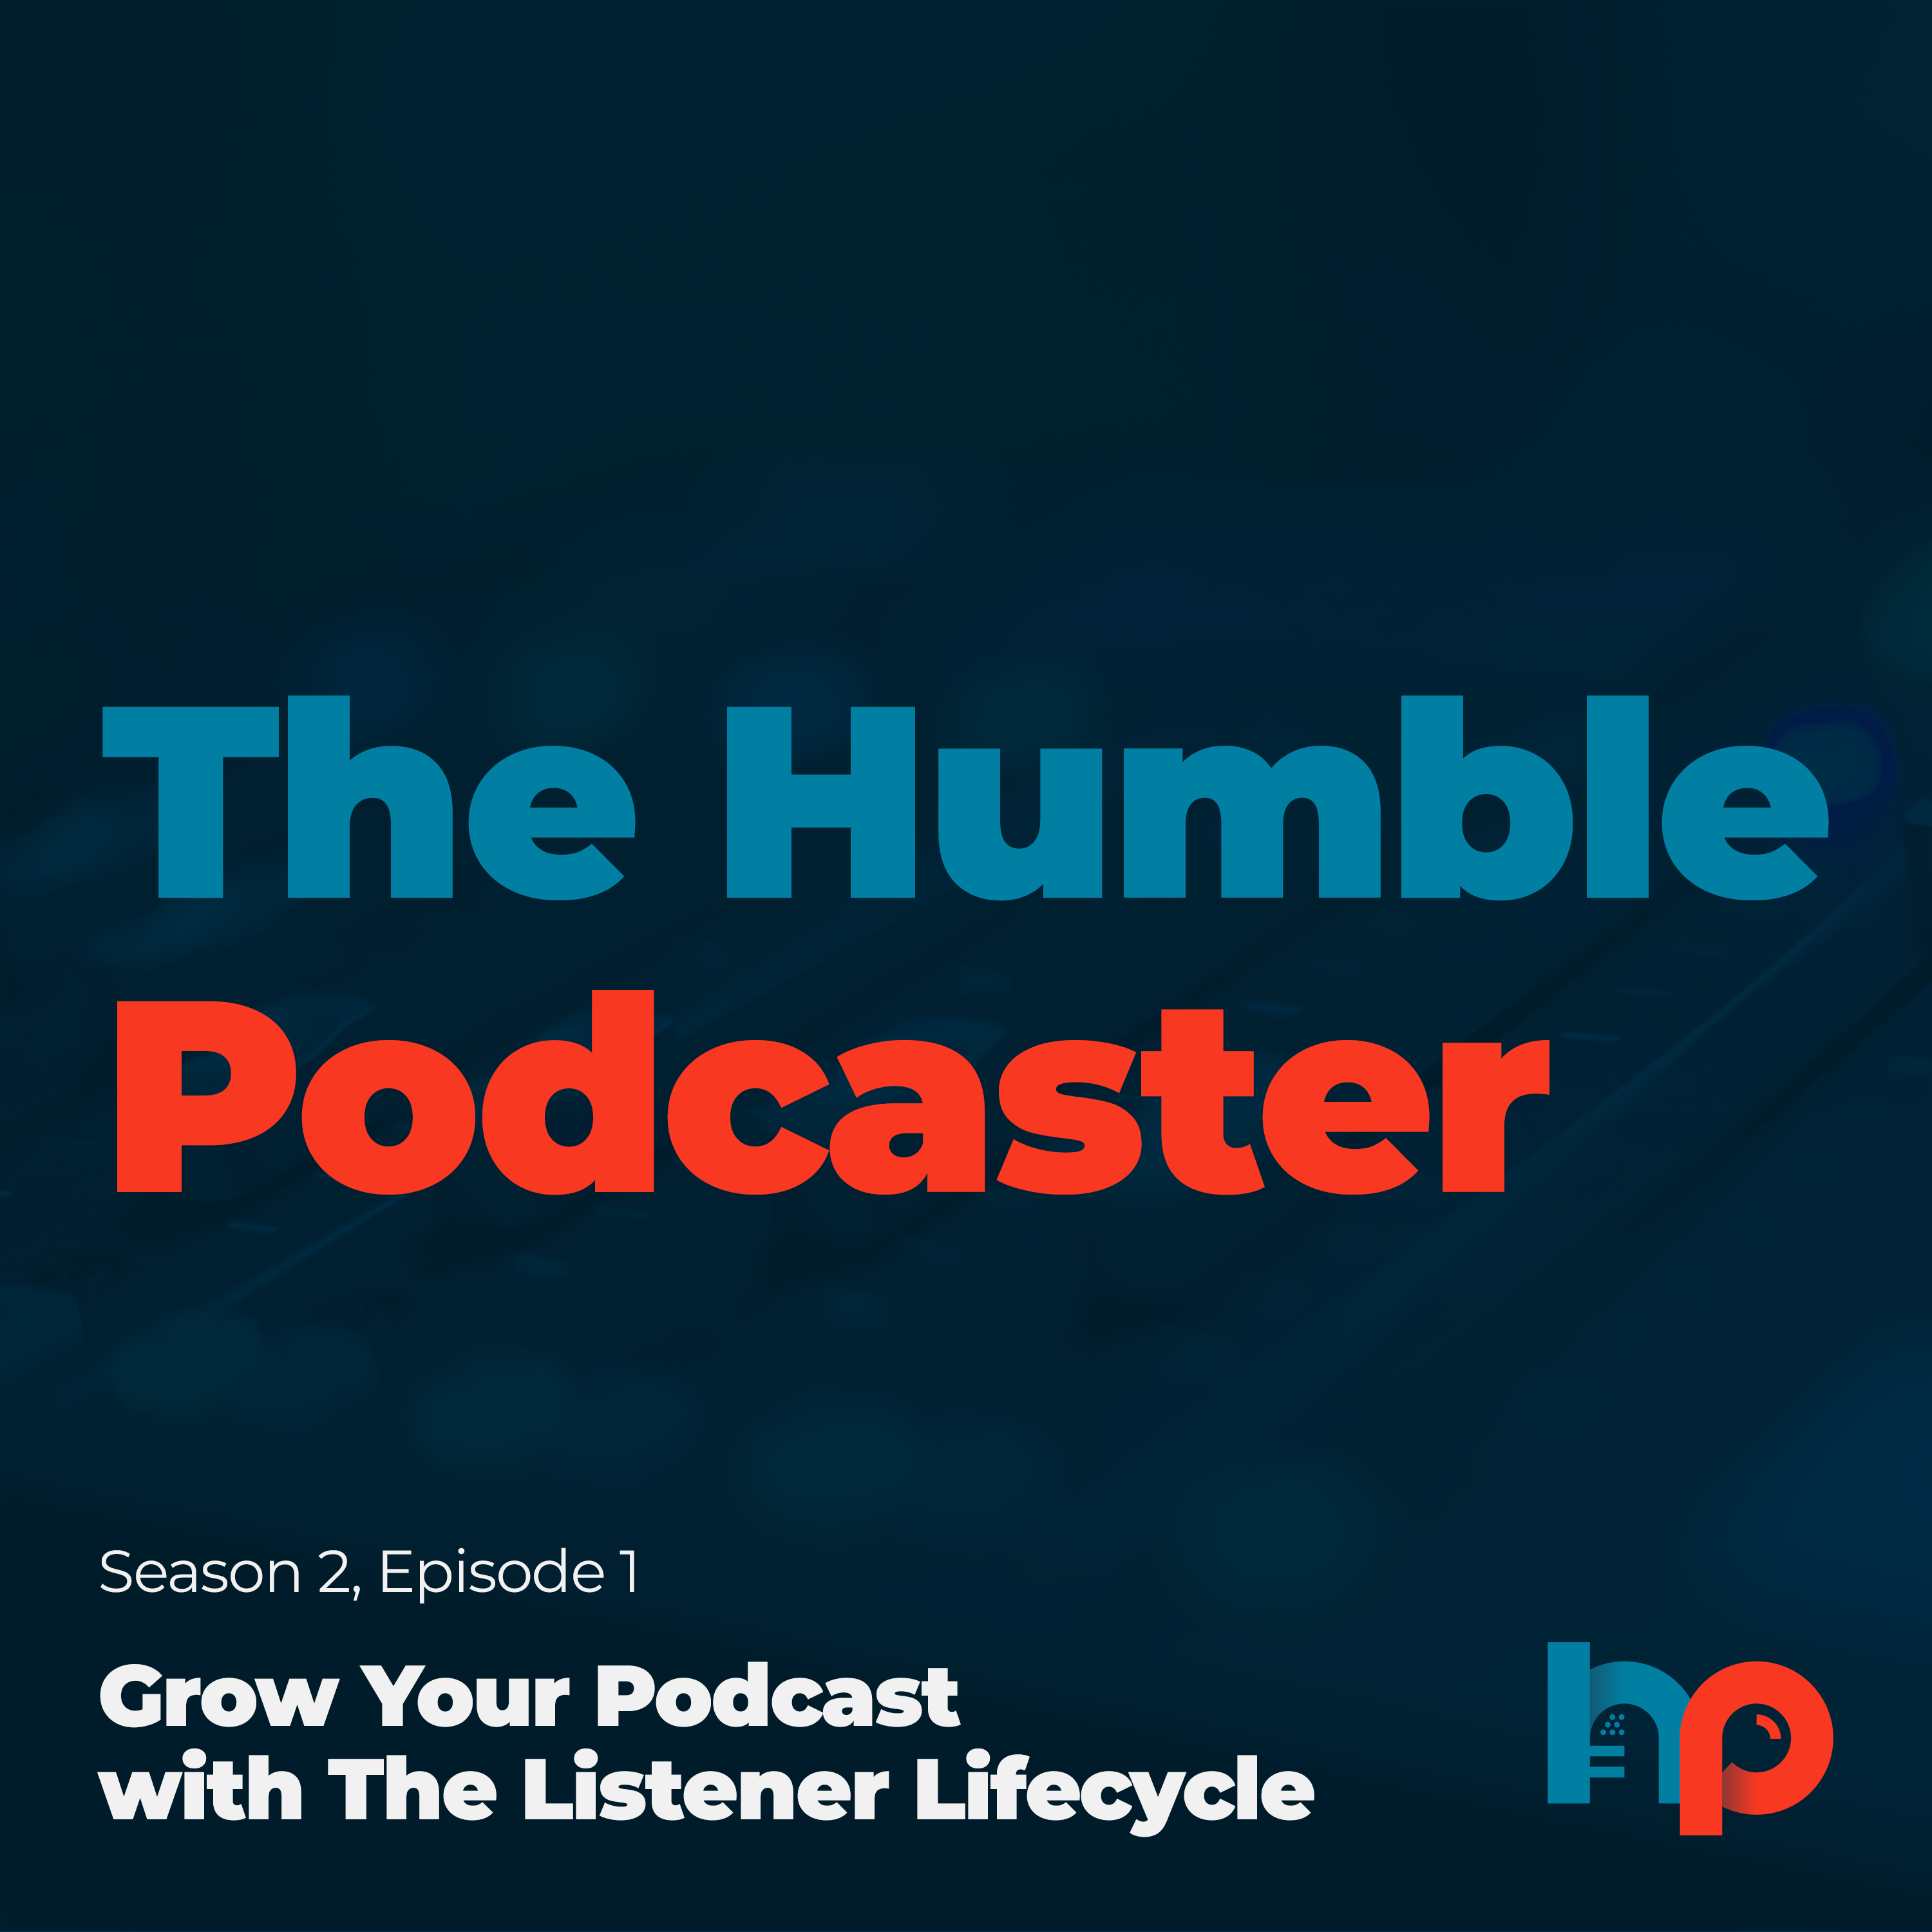 Grow Your Podcast with The Listener Lifecycle